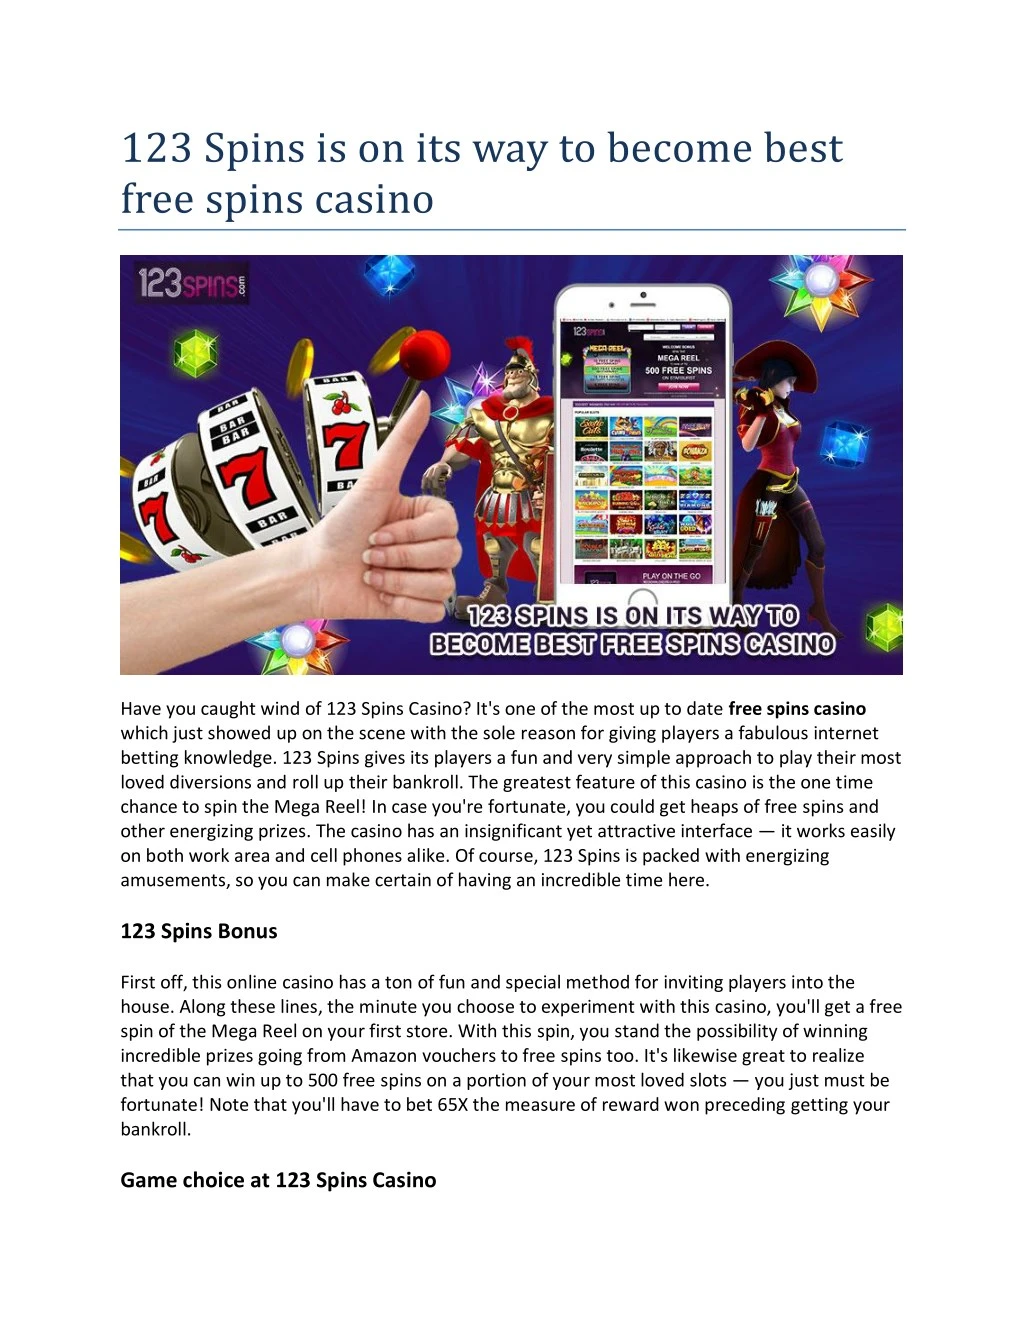 123 spins is on its way to become best free spins n.